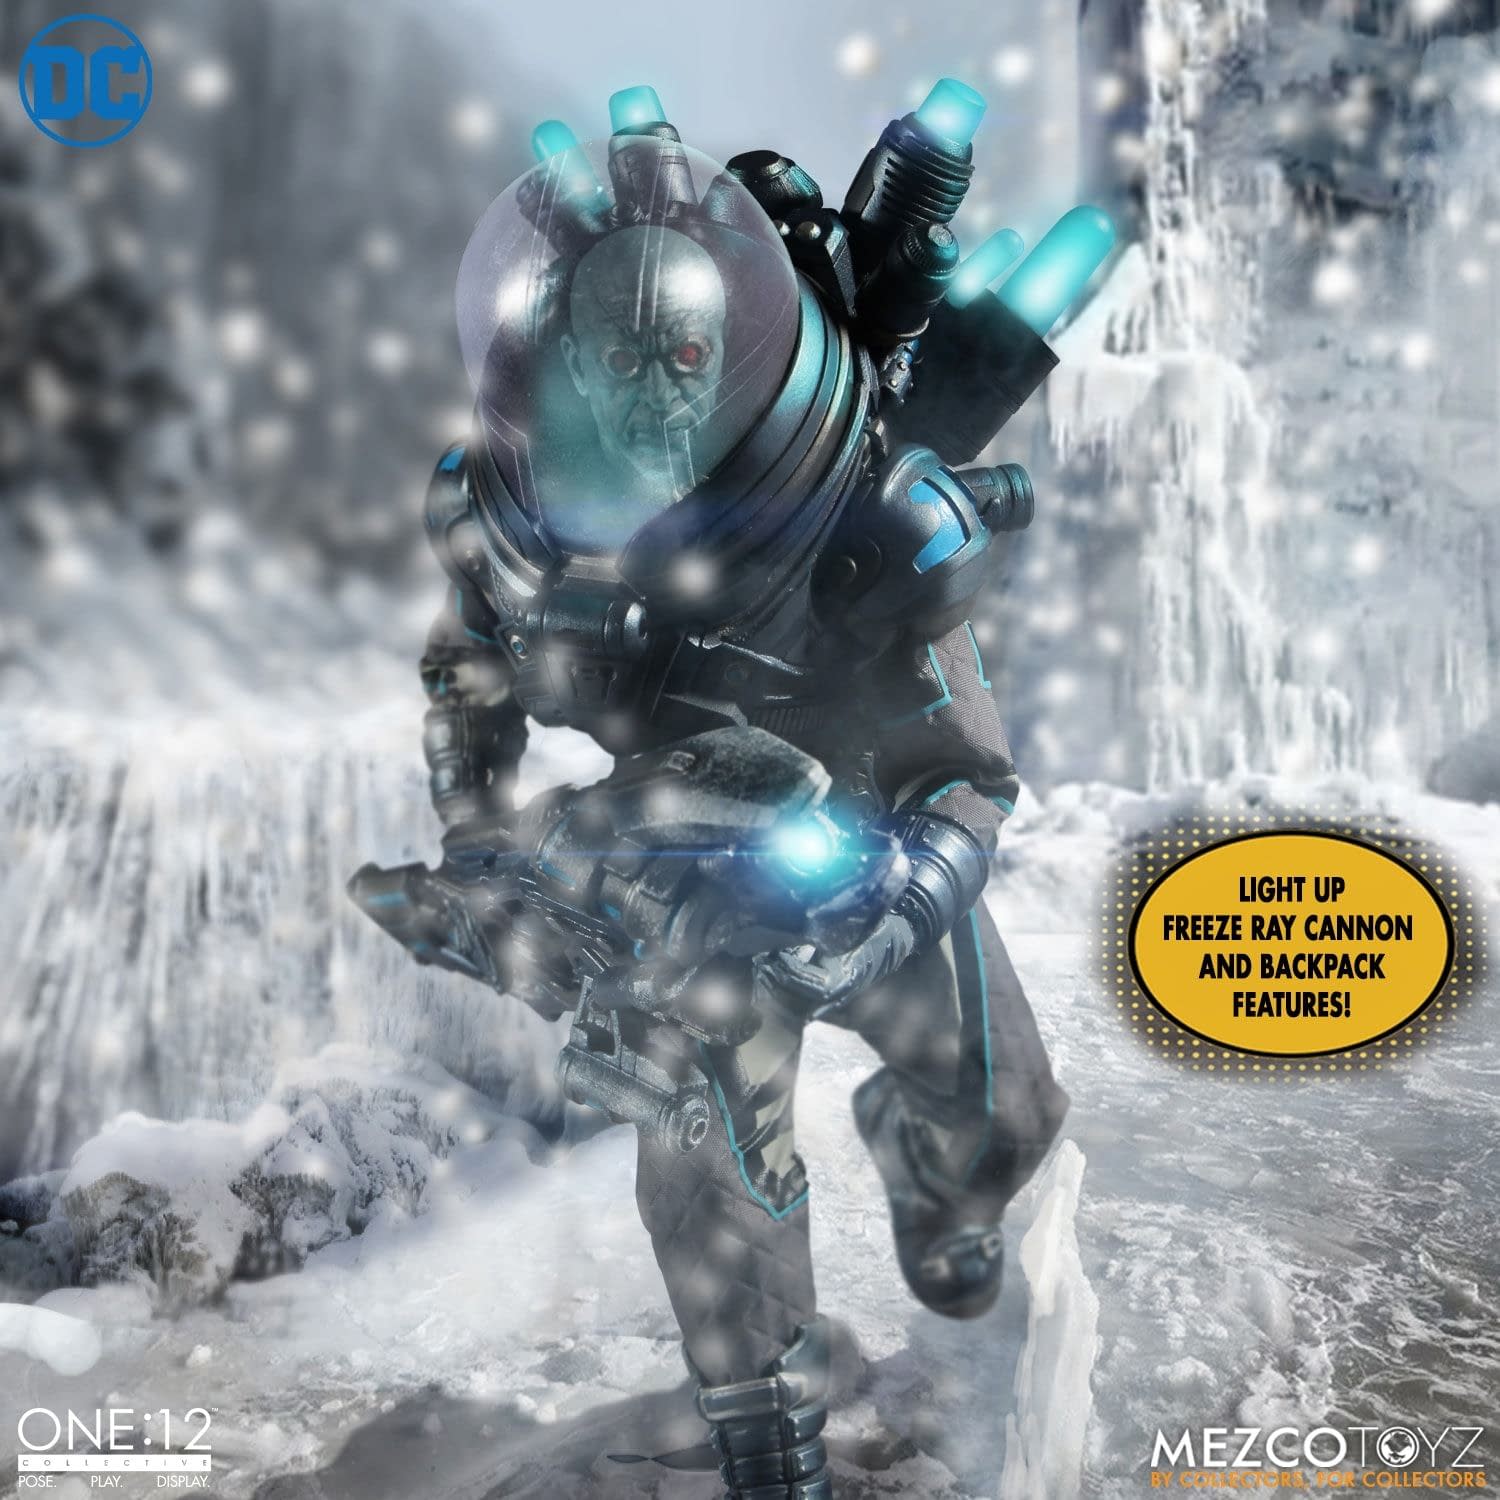 Mr. Freeze One:12 Collective Figure from Mezco Toyz